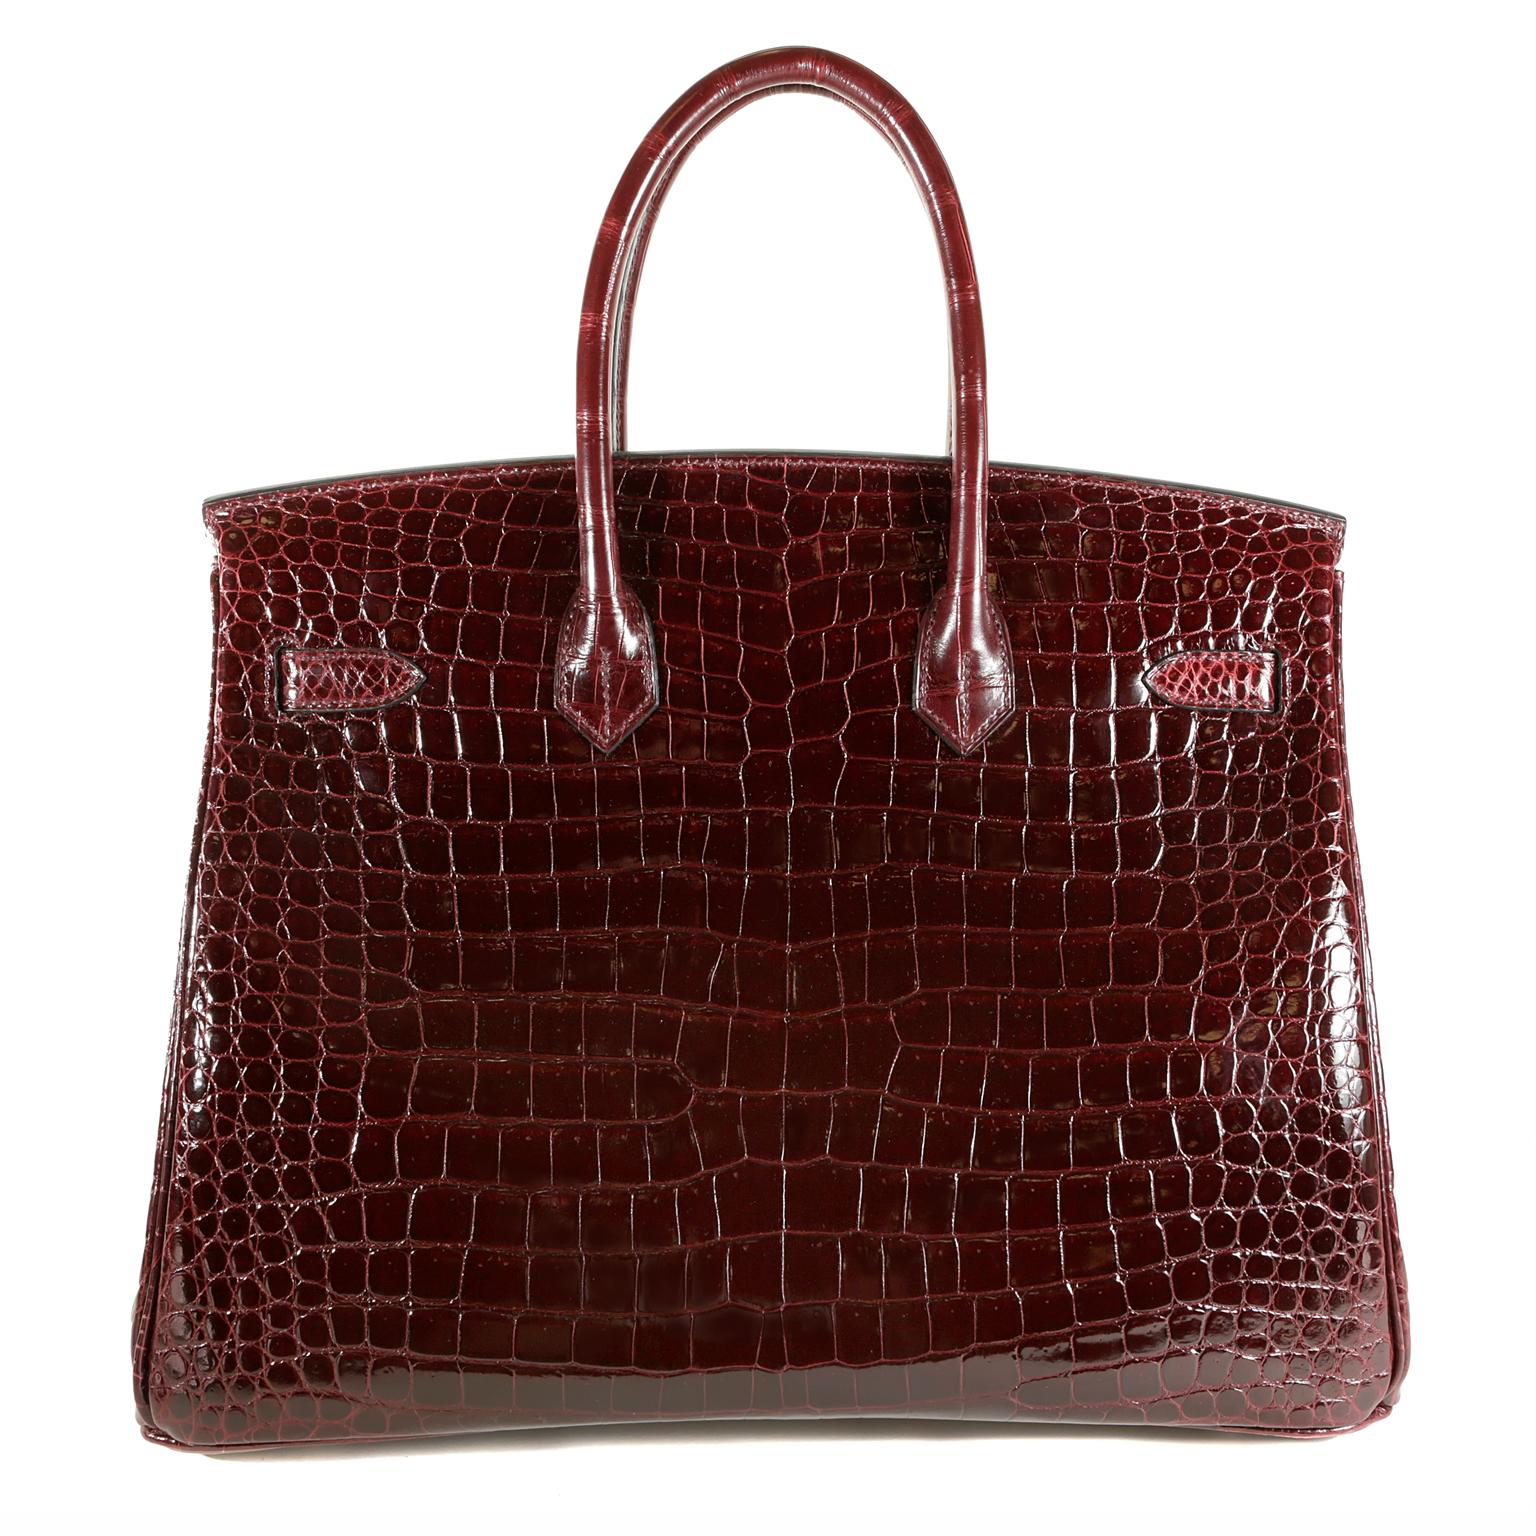 Hermès Bordeaux Porosus Crocodile 35 cm Birkin Bag- Pristine Unworn Condition; never before carried.  
The protective plastic is intact on the hardware and it has been meticulously stored.   Hermès bags are considered the ultimate luxury item the